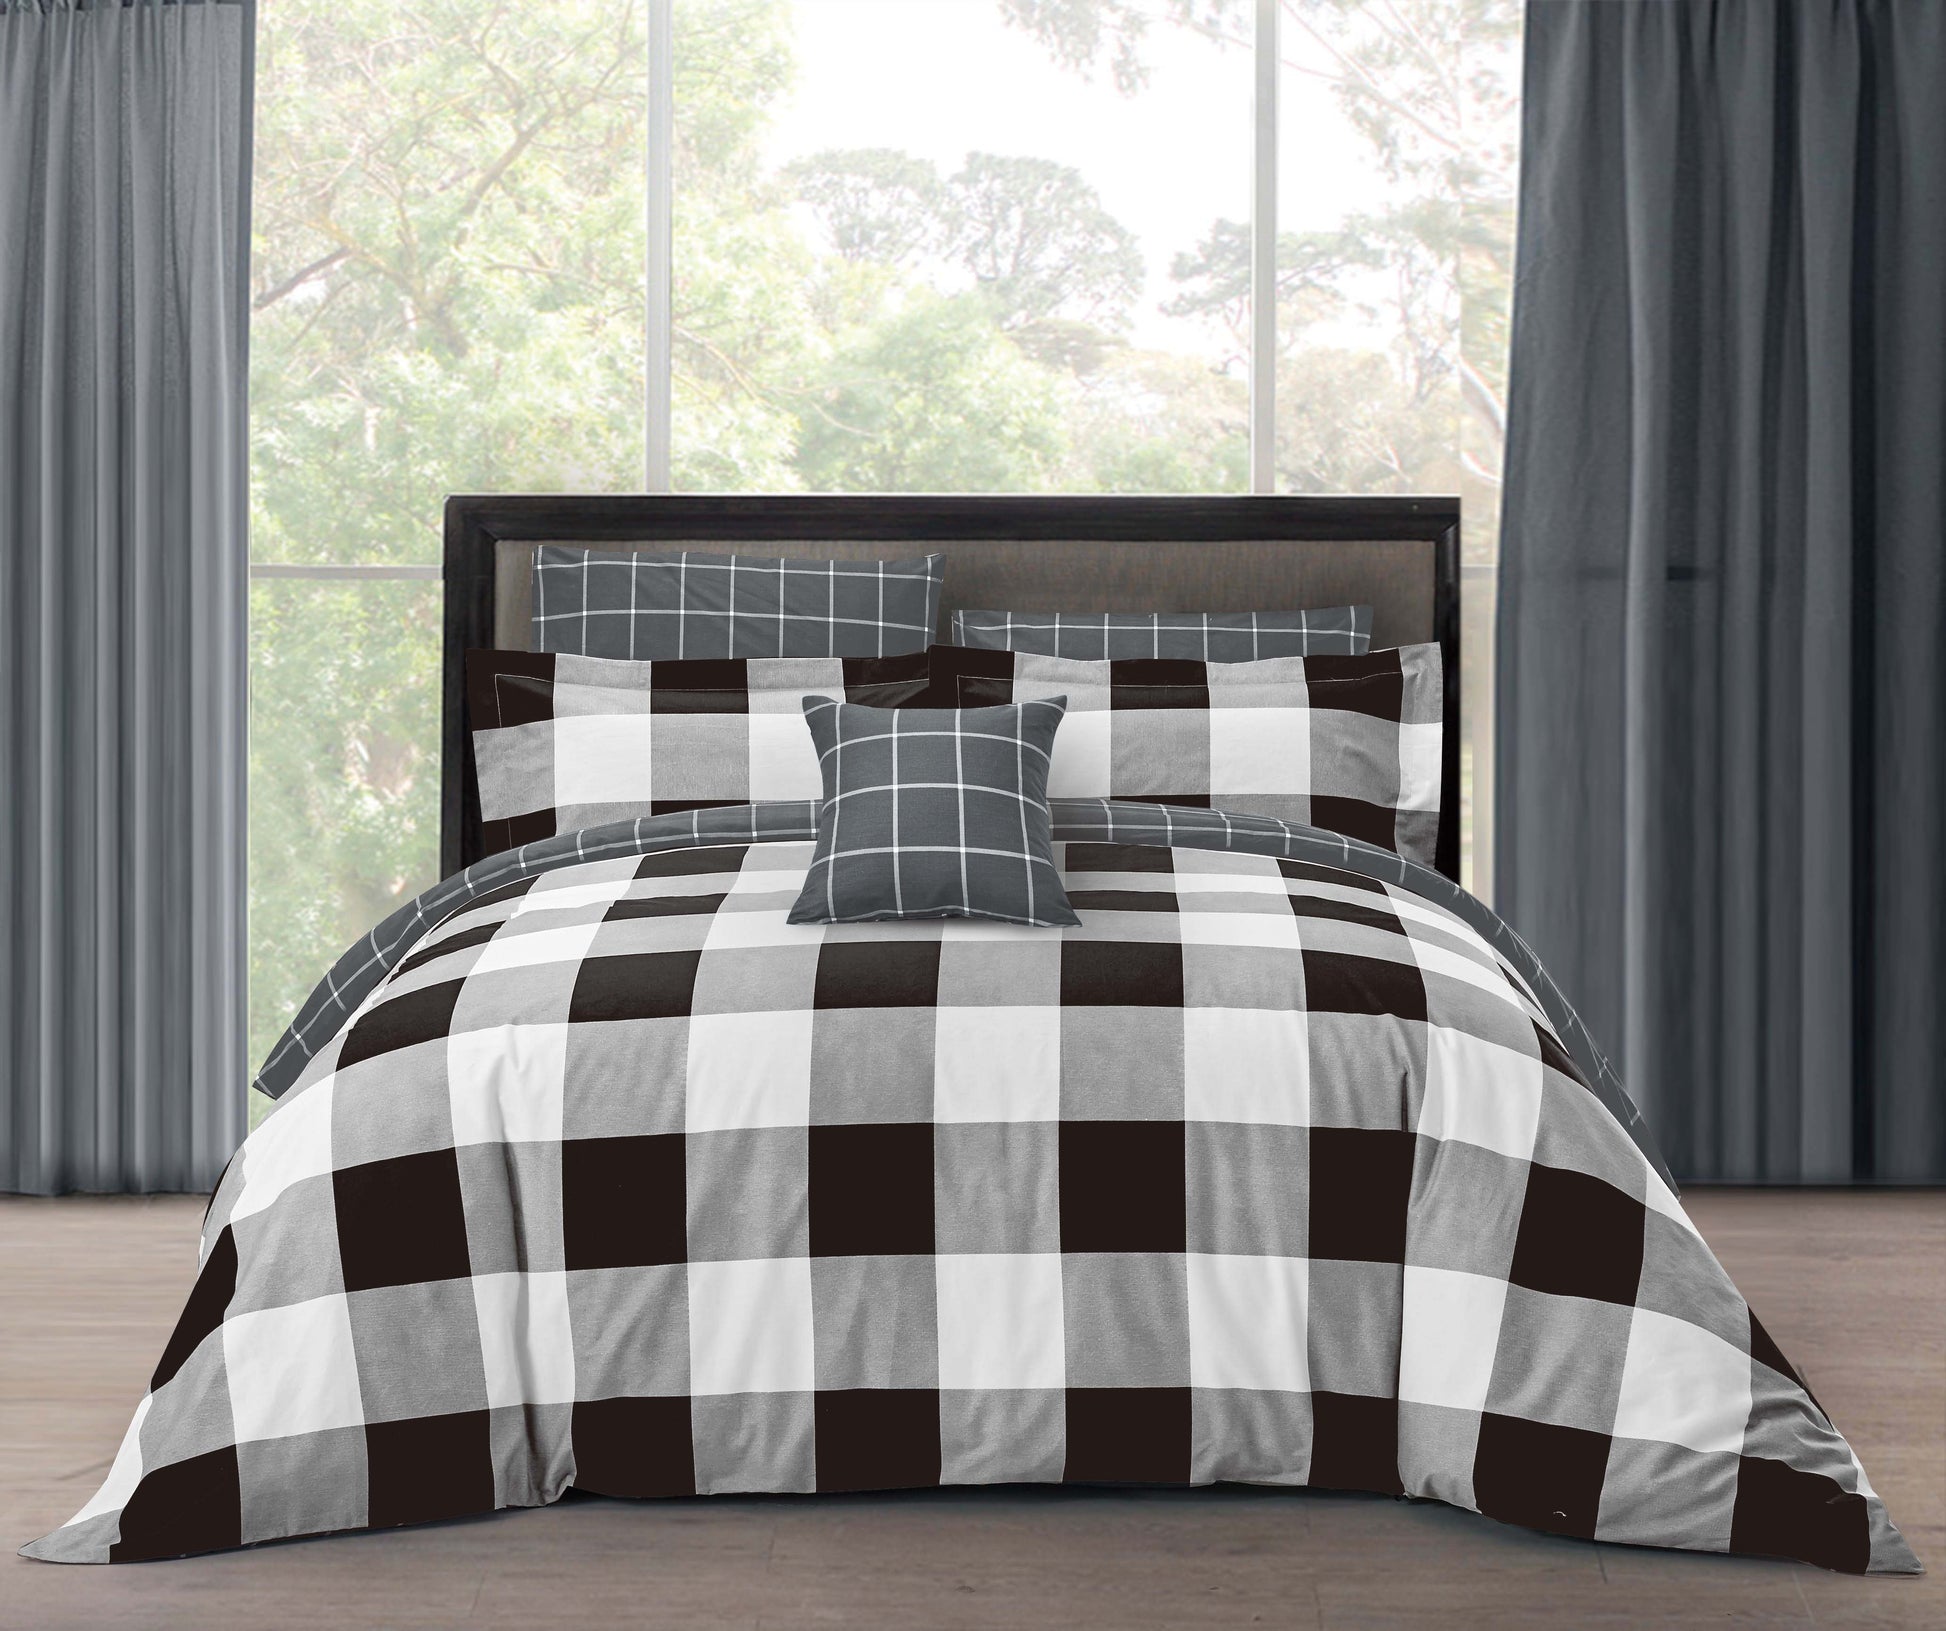 Dynasty Duvet Cover Set freeshipping - North Home